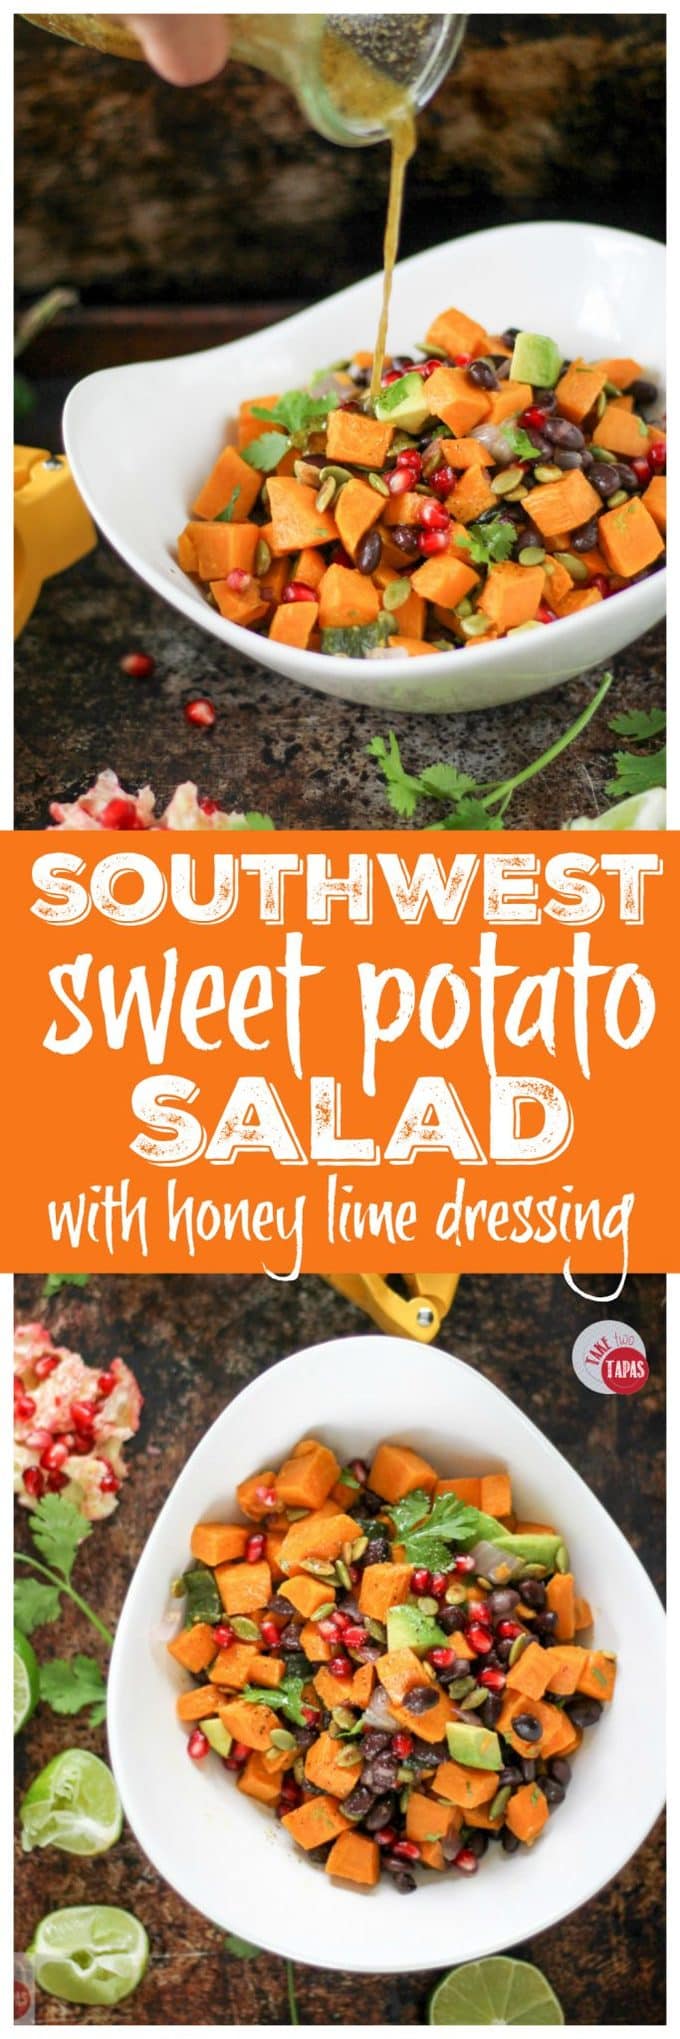 Pinterest collage image with text "southwest sweet potato salad with honey lime dressing"